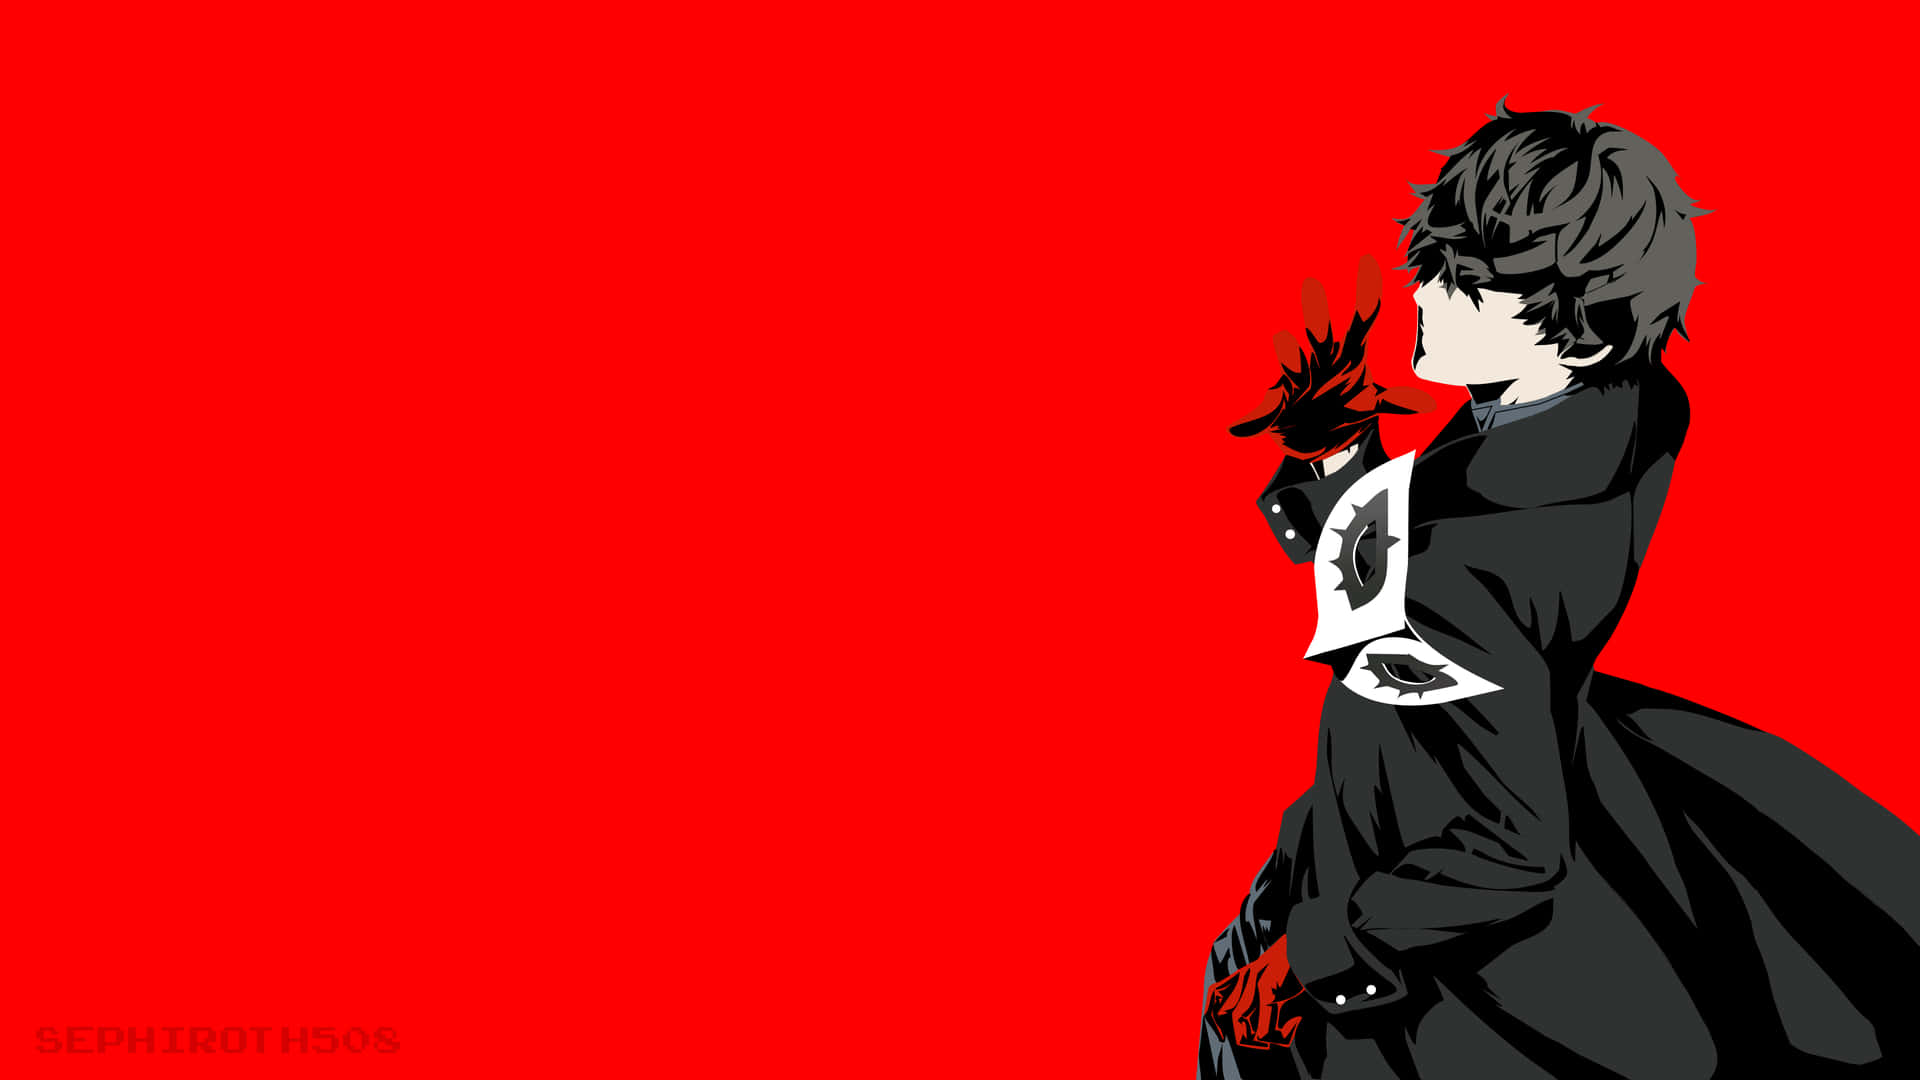 The Official Logo of Persona 5 Wallpaper